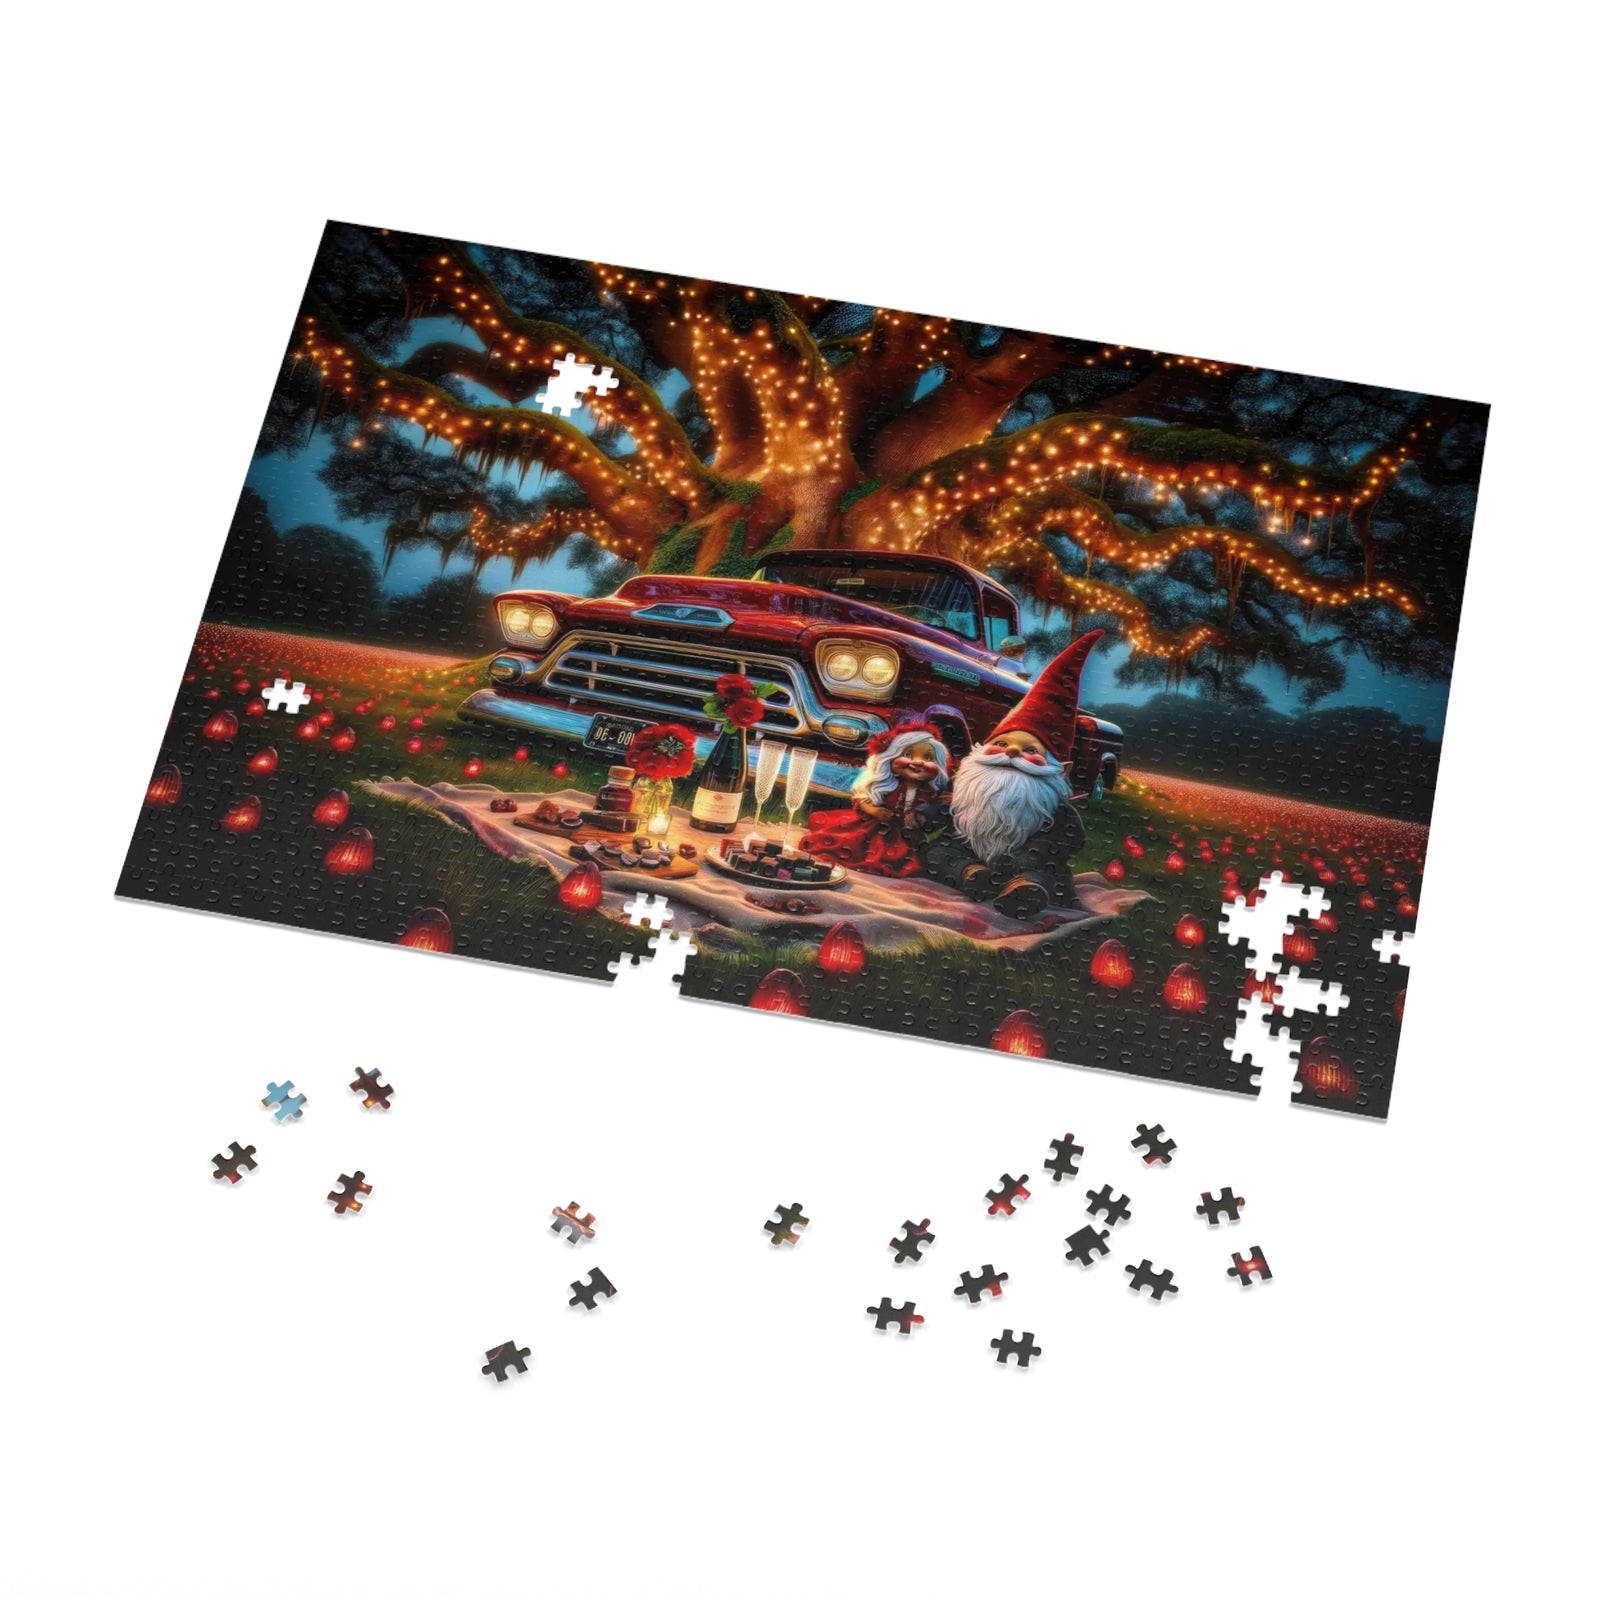 Lulu and Gigglefoot's Romantic Valentine Jigsaw Puzzle